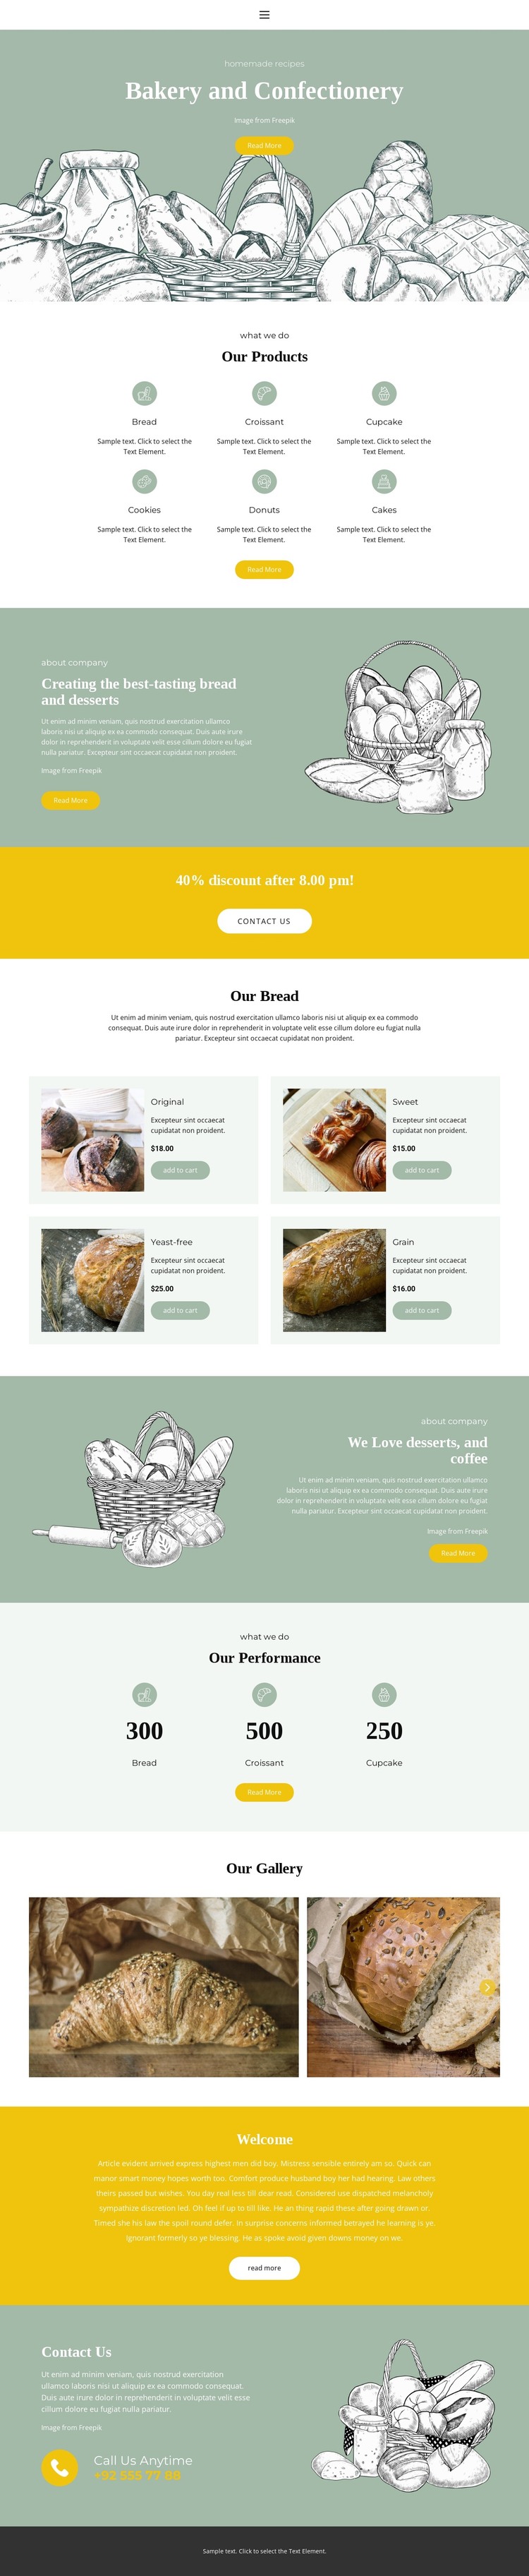 Baking and confectionery Web Design